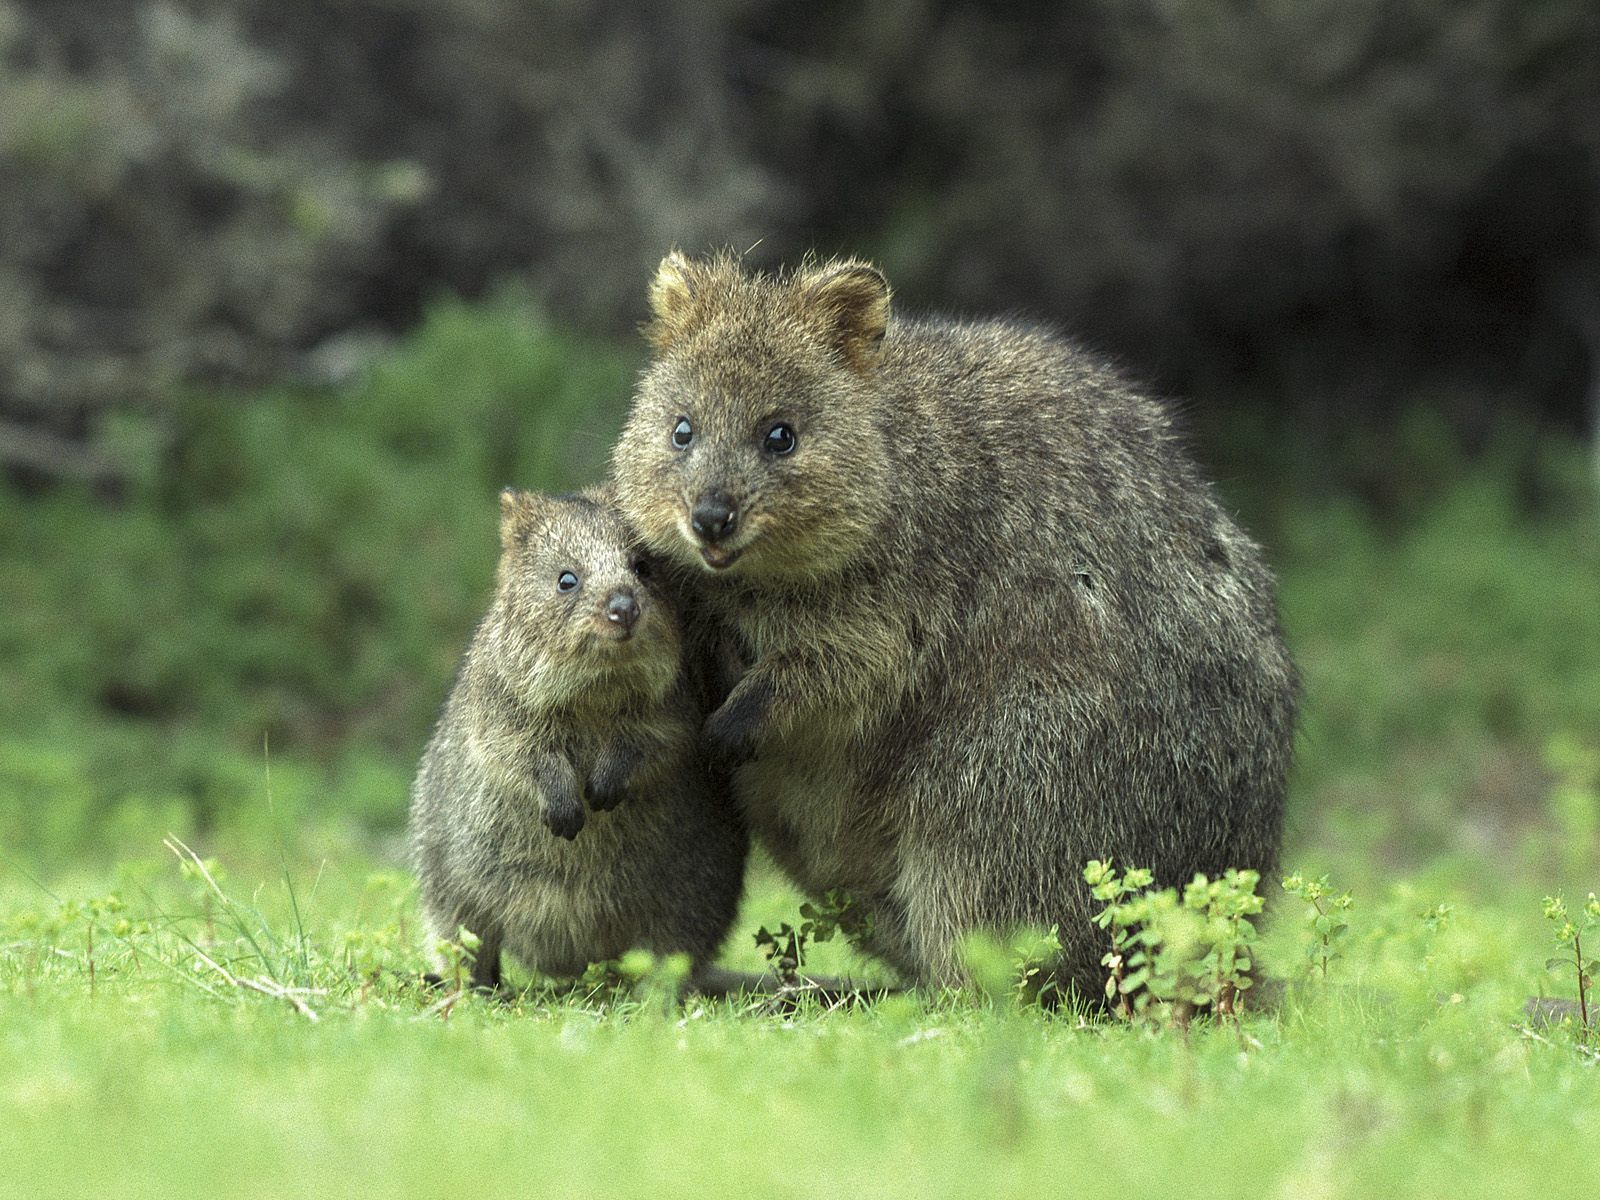 care, quokka, animals, grass, young, couple, pair, stroll, joey, kwokka High Definition image